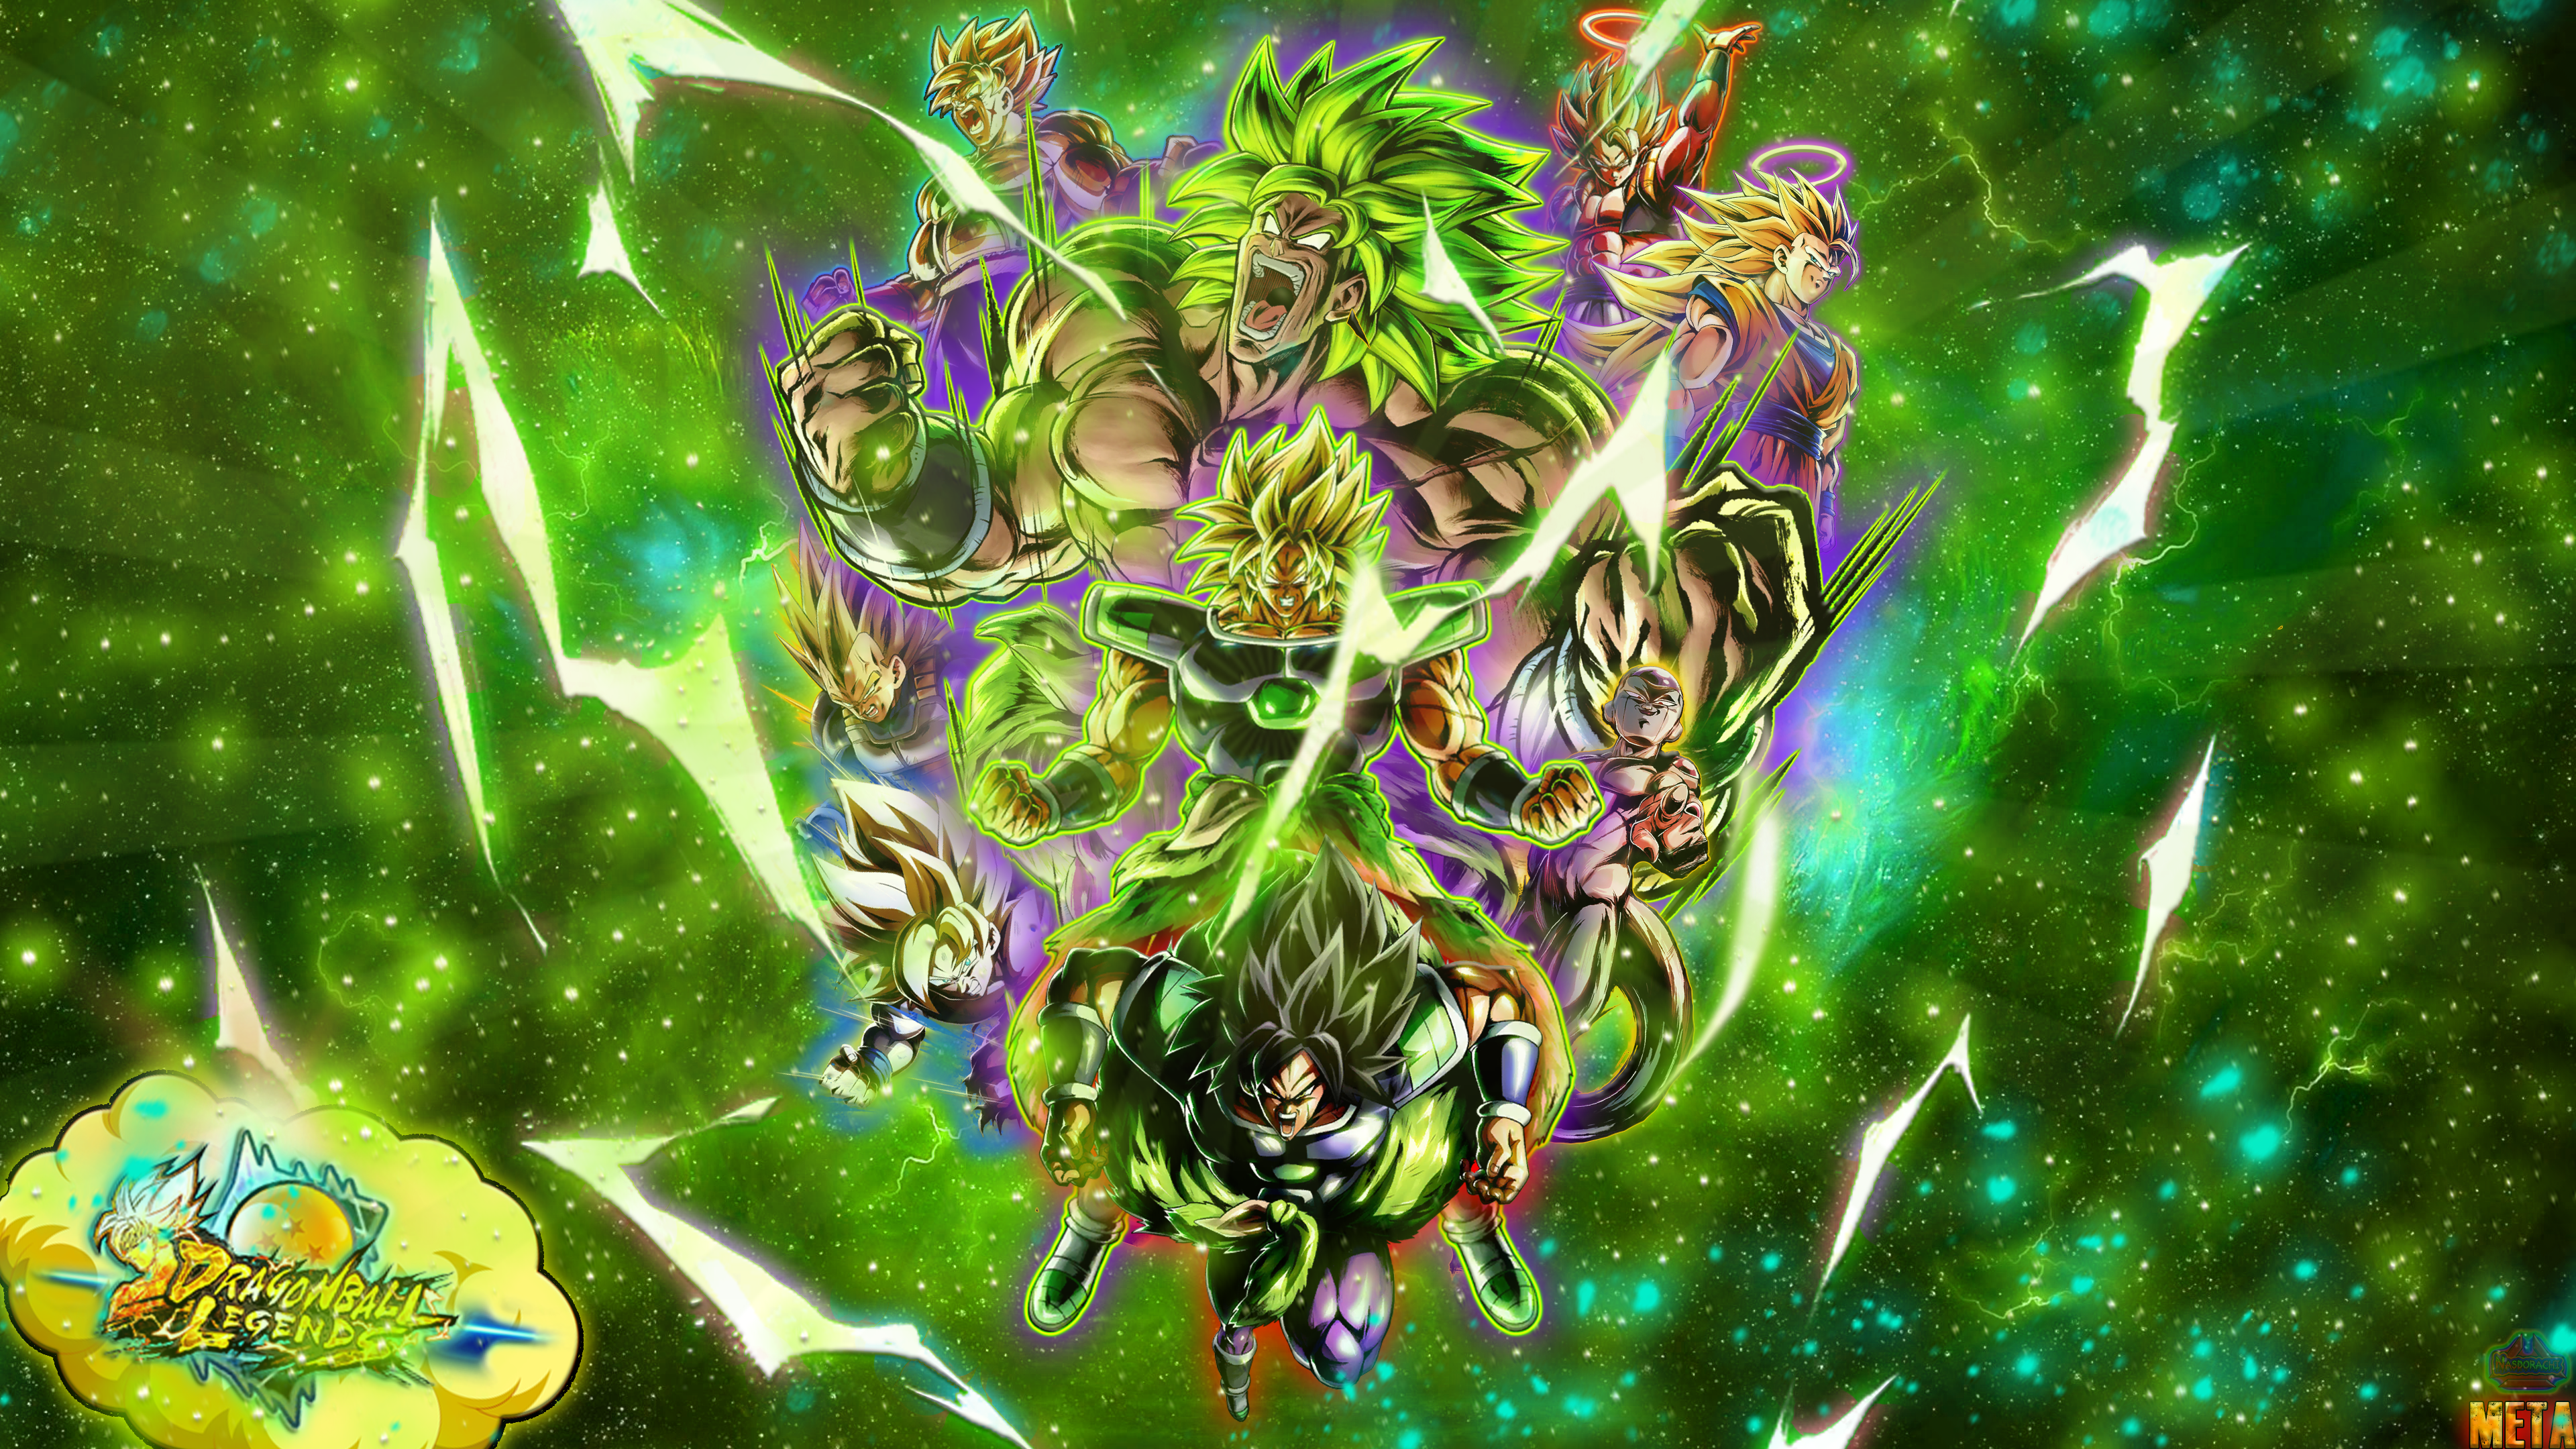 SSJ BROLY META 4K Wallpaper for PC see people making the things and I want in. I hope you enjoy this visual representation of our current Meta!